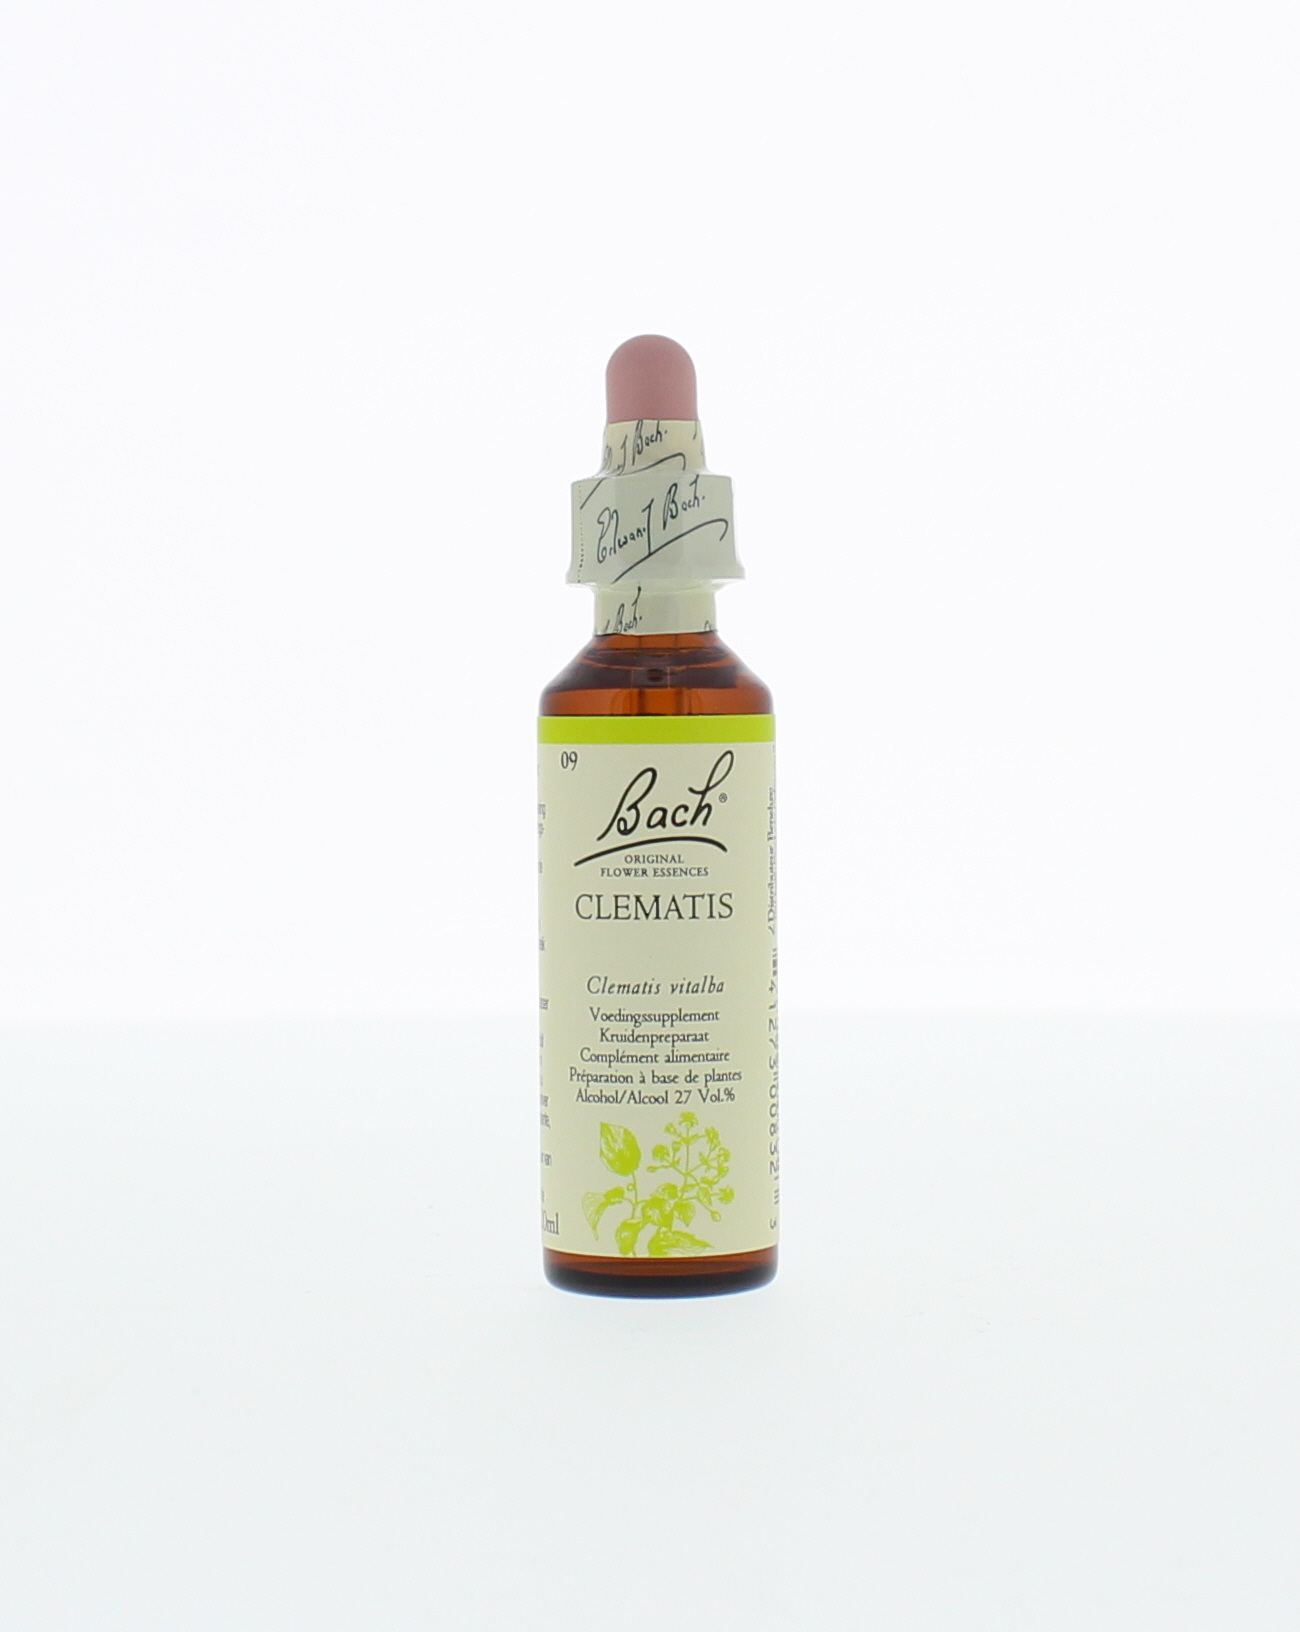 Bach Clematis/Bosrank (9) 20ml PL500/30